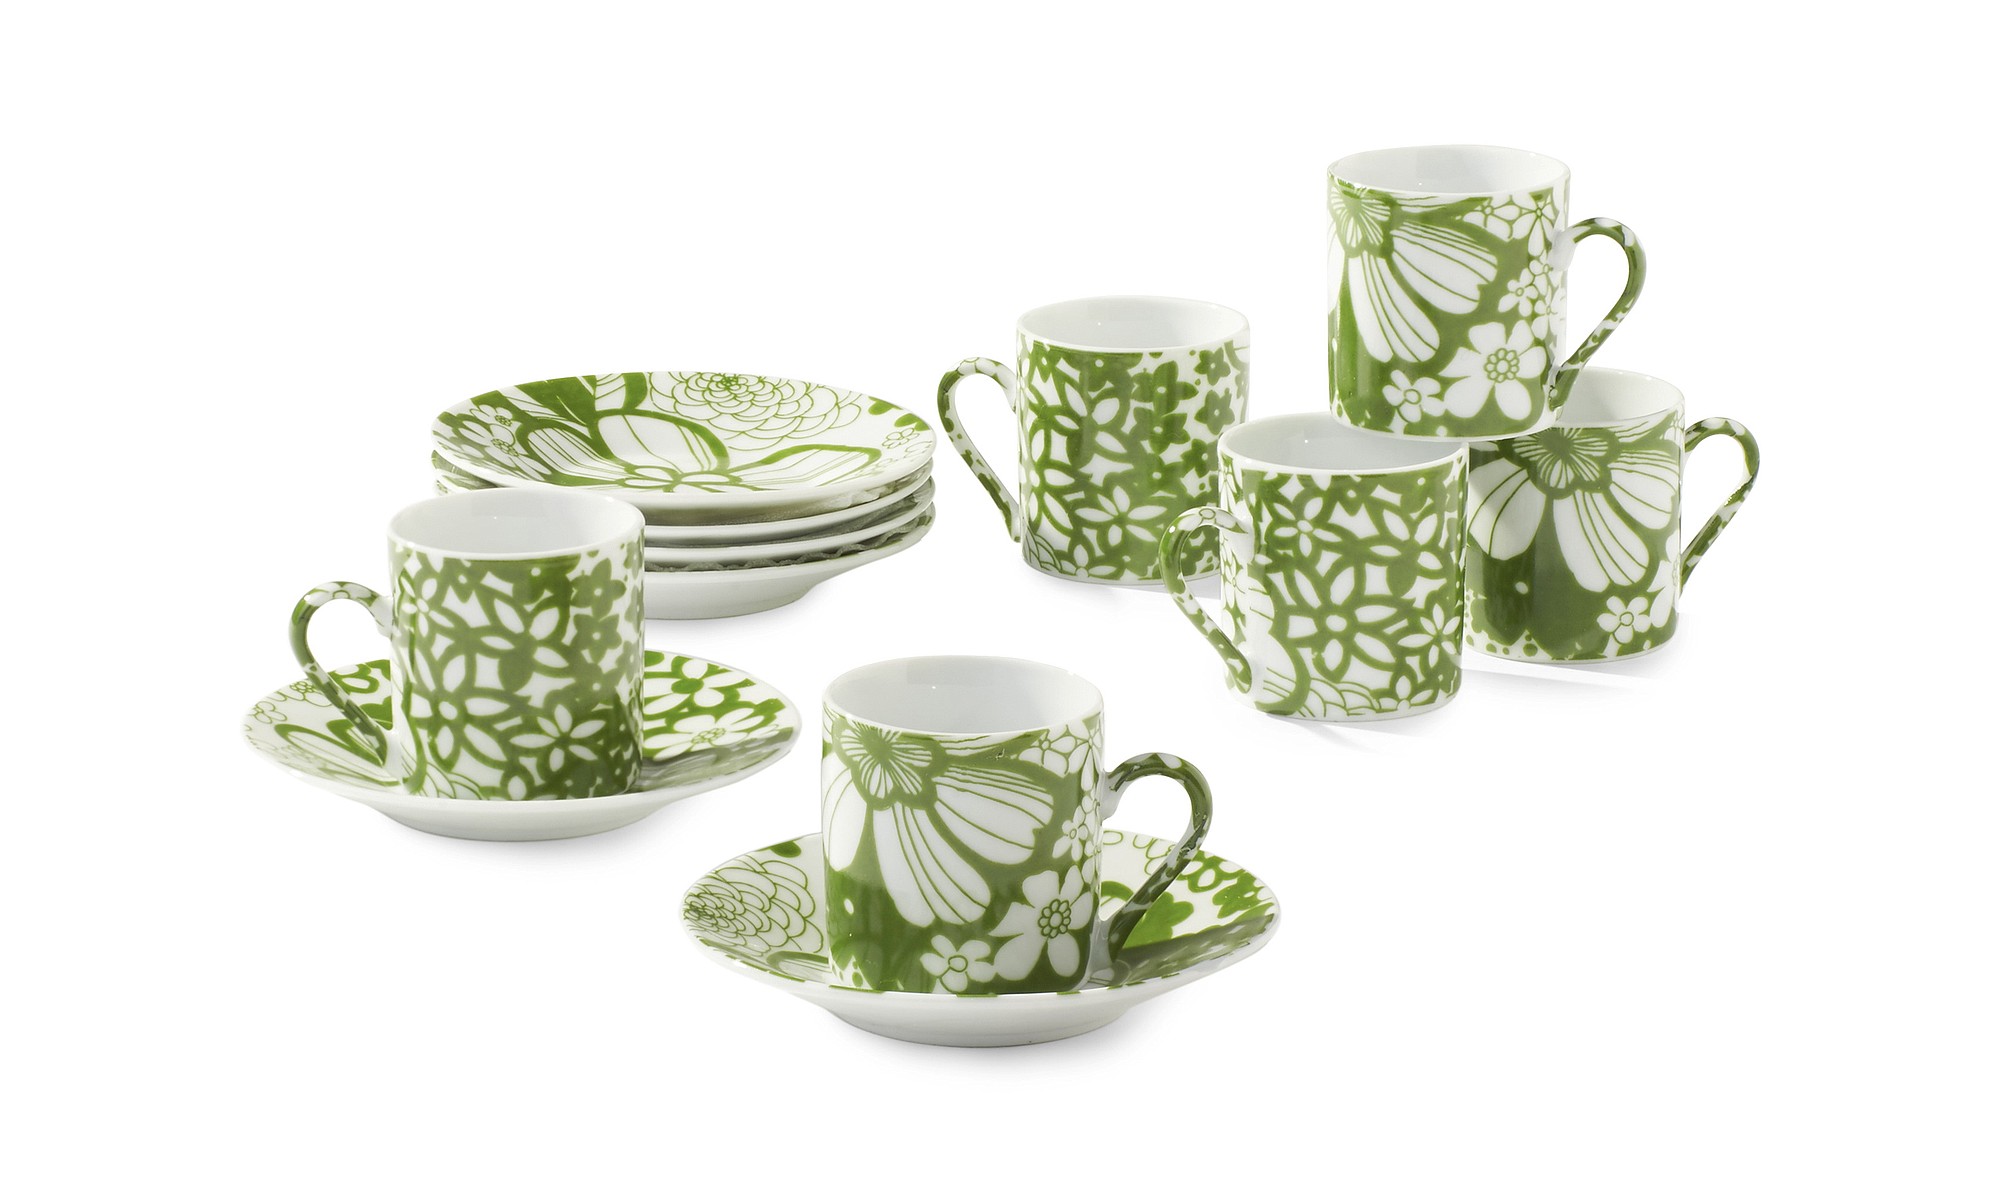 This undated photo provided by HomeGoods shows fresh green and white hues in a floral print that make this demitasse set from HomeGoods a pretty addition to a home?s chinaware collection.